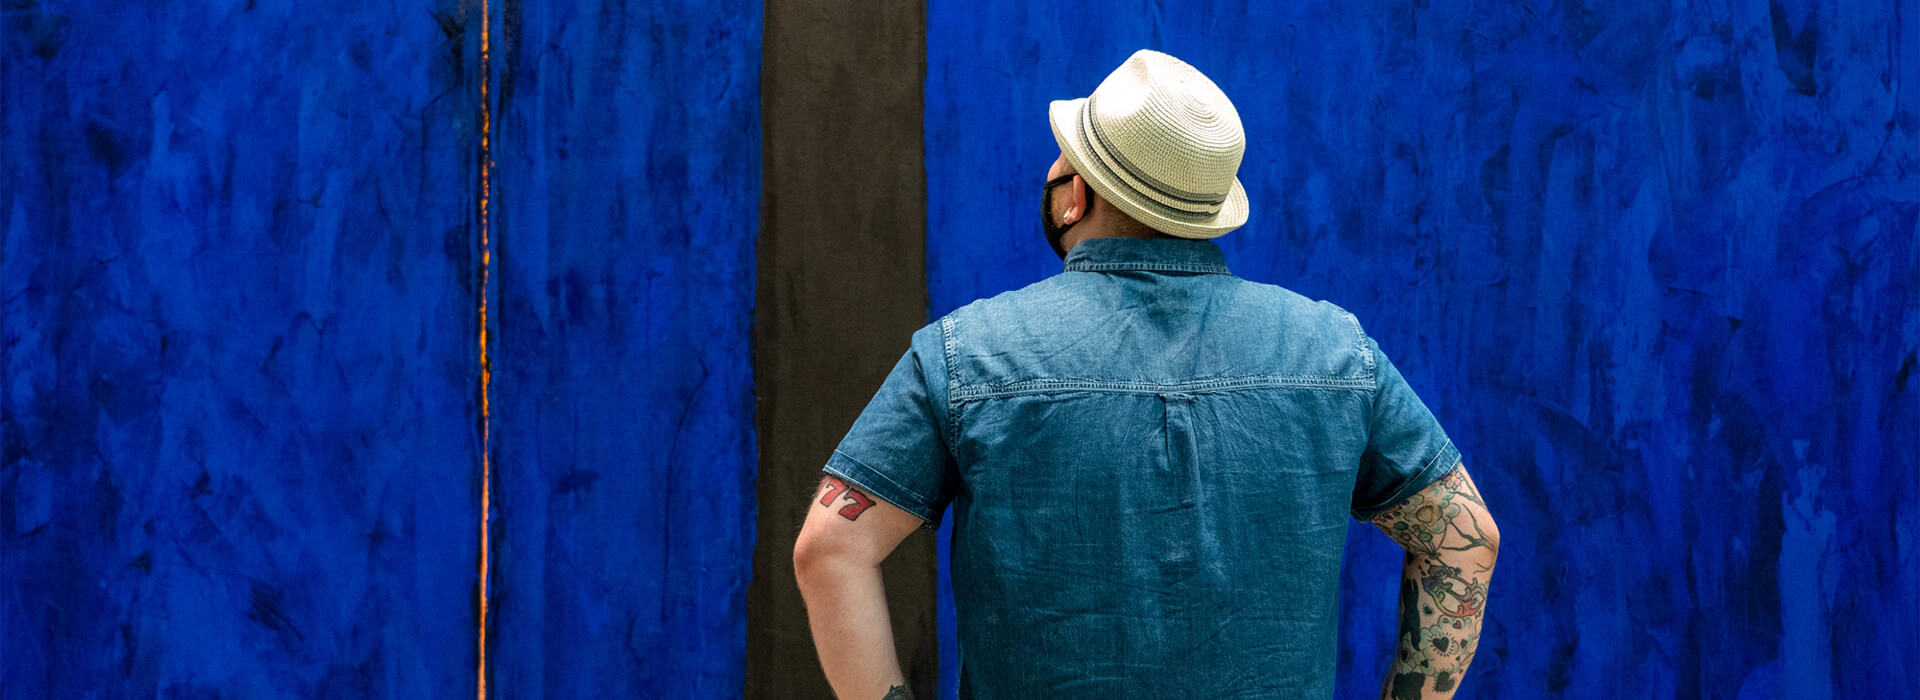 Man wearing a blue short sleeve shirt and a white hat looks up at a large blue abstract painting